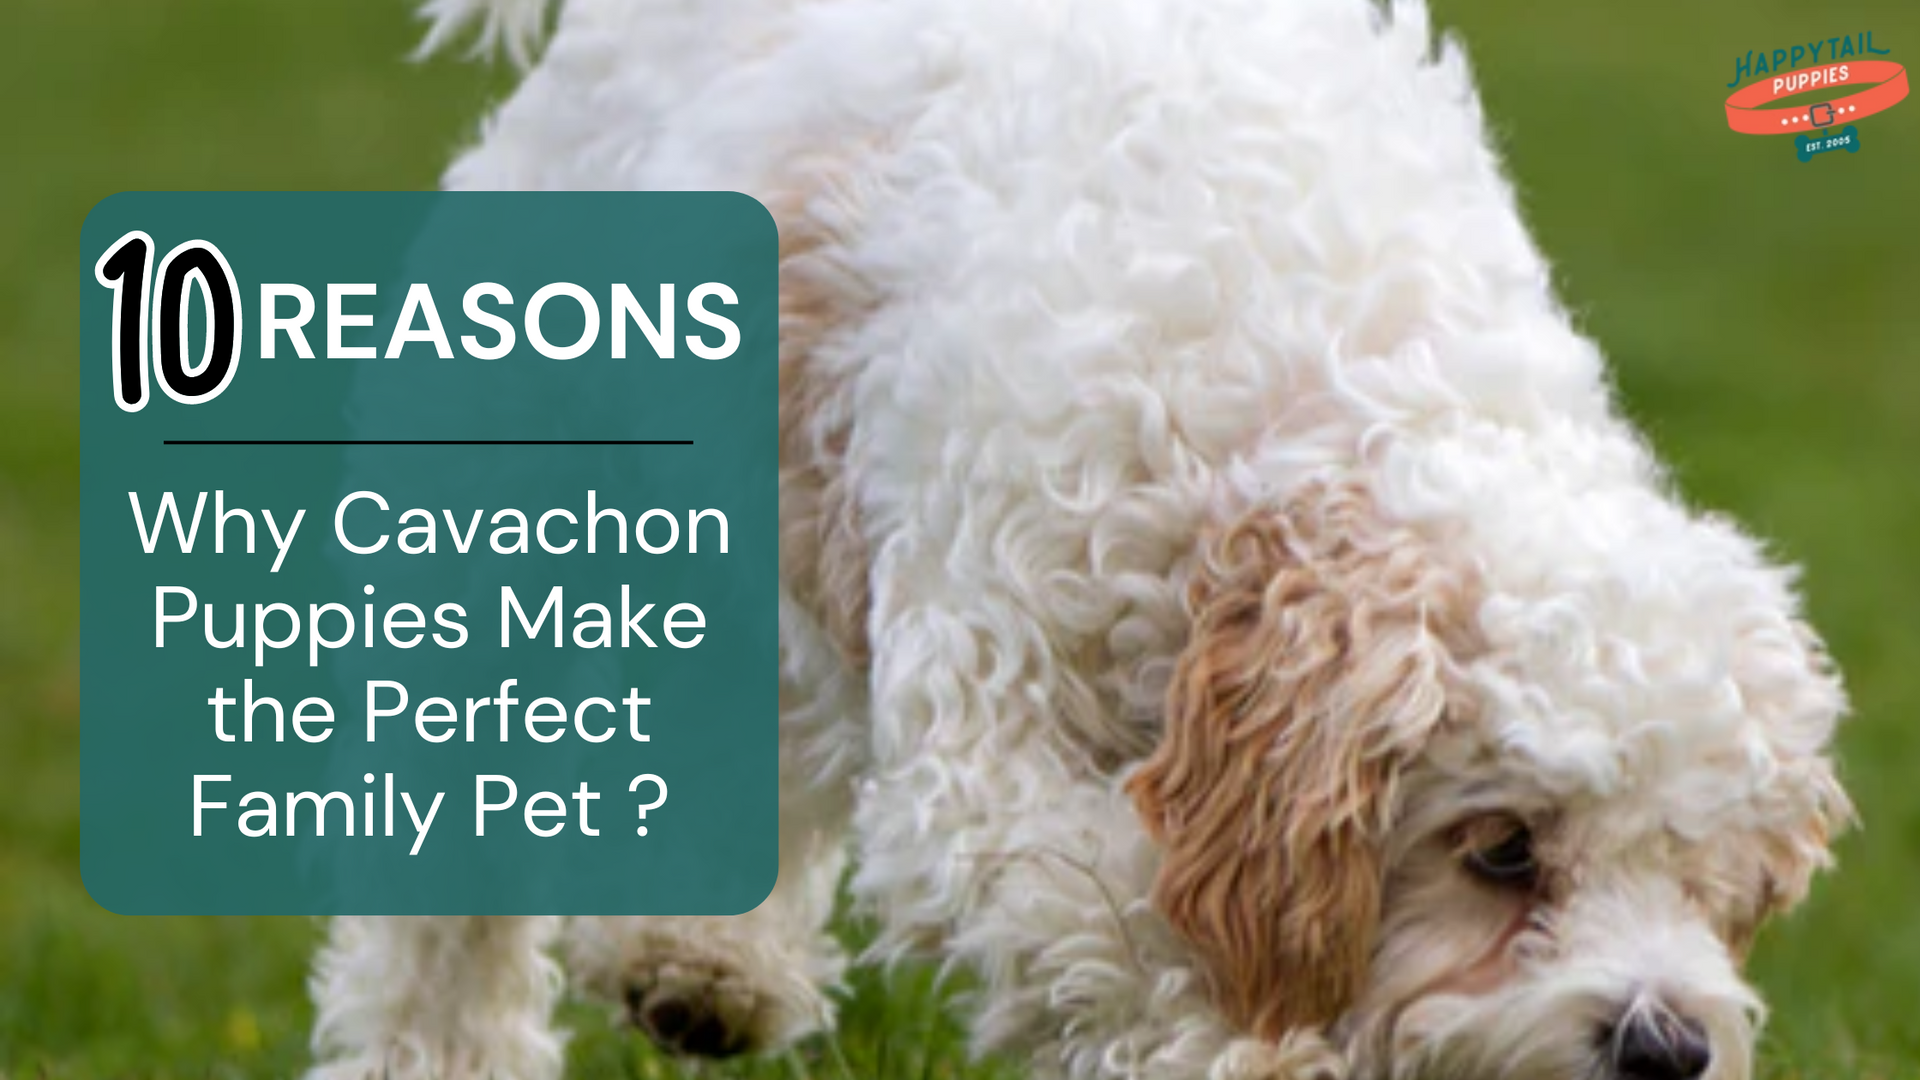 Cavachon puppies the perfect family pet